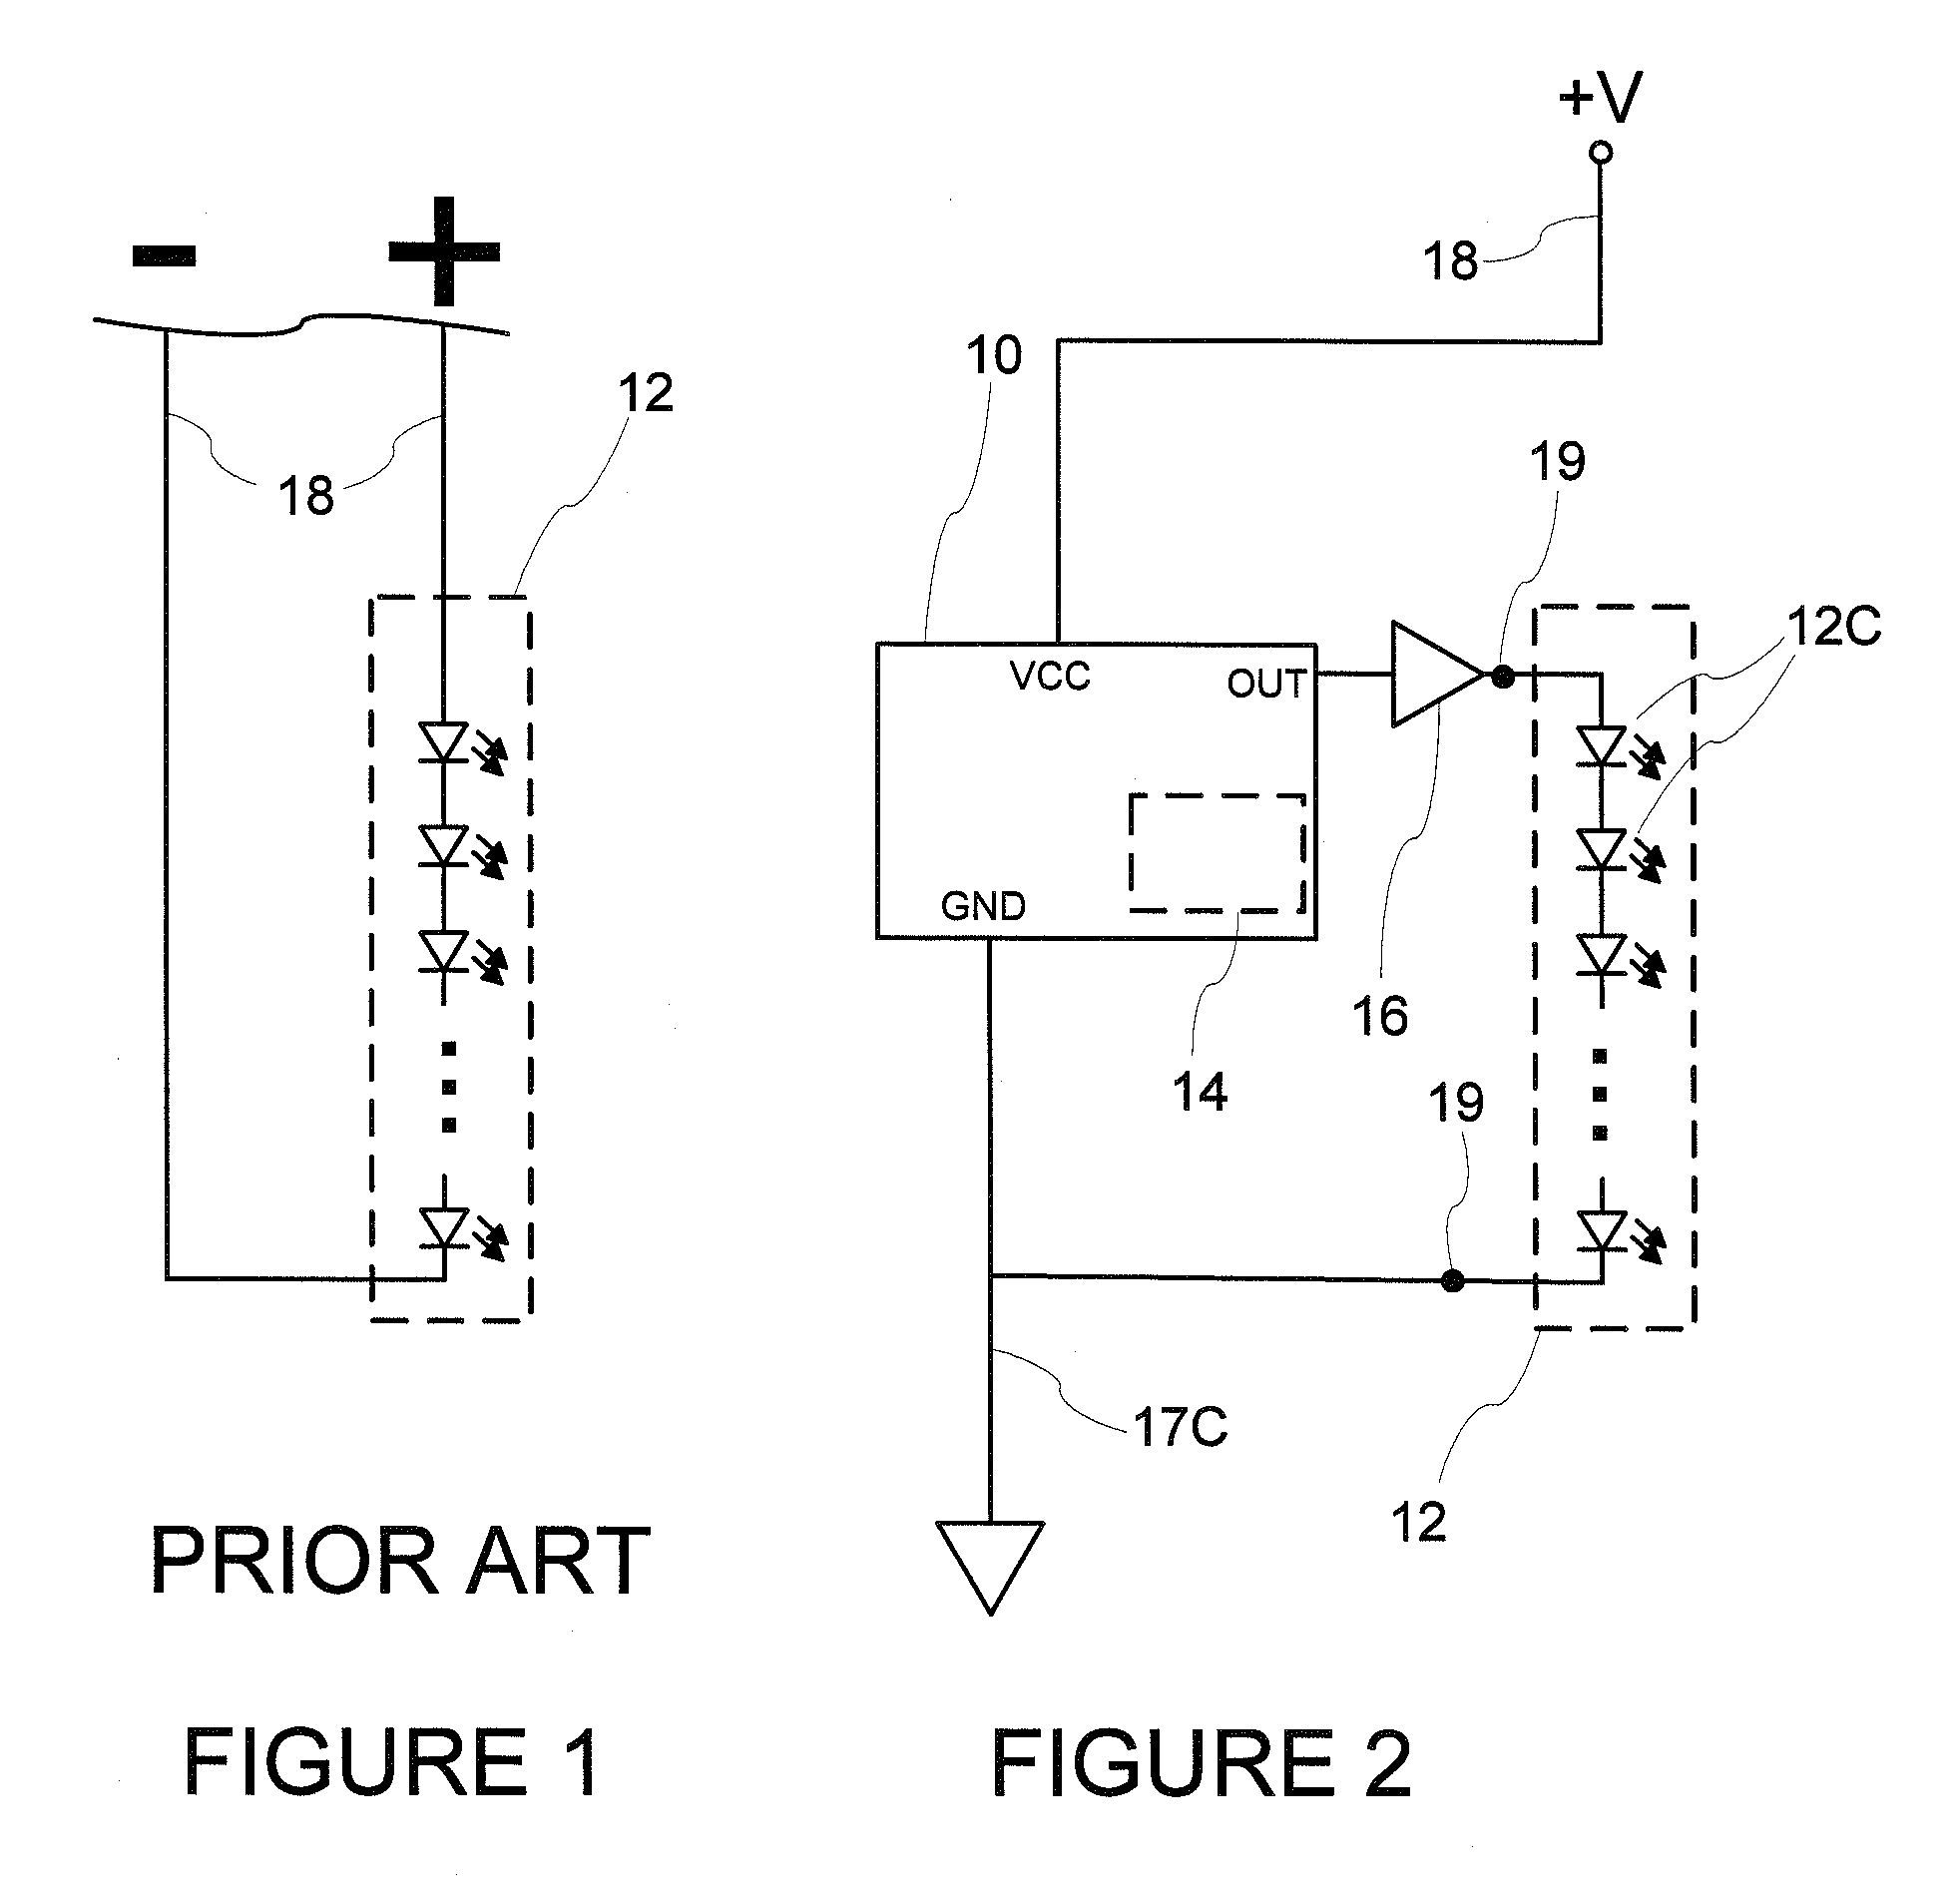 System and Method for Vehicular Communications